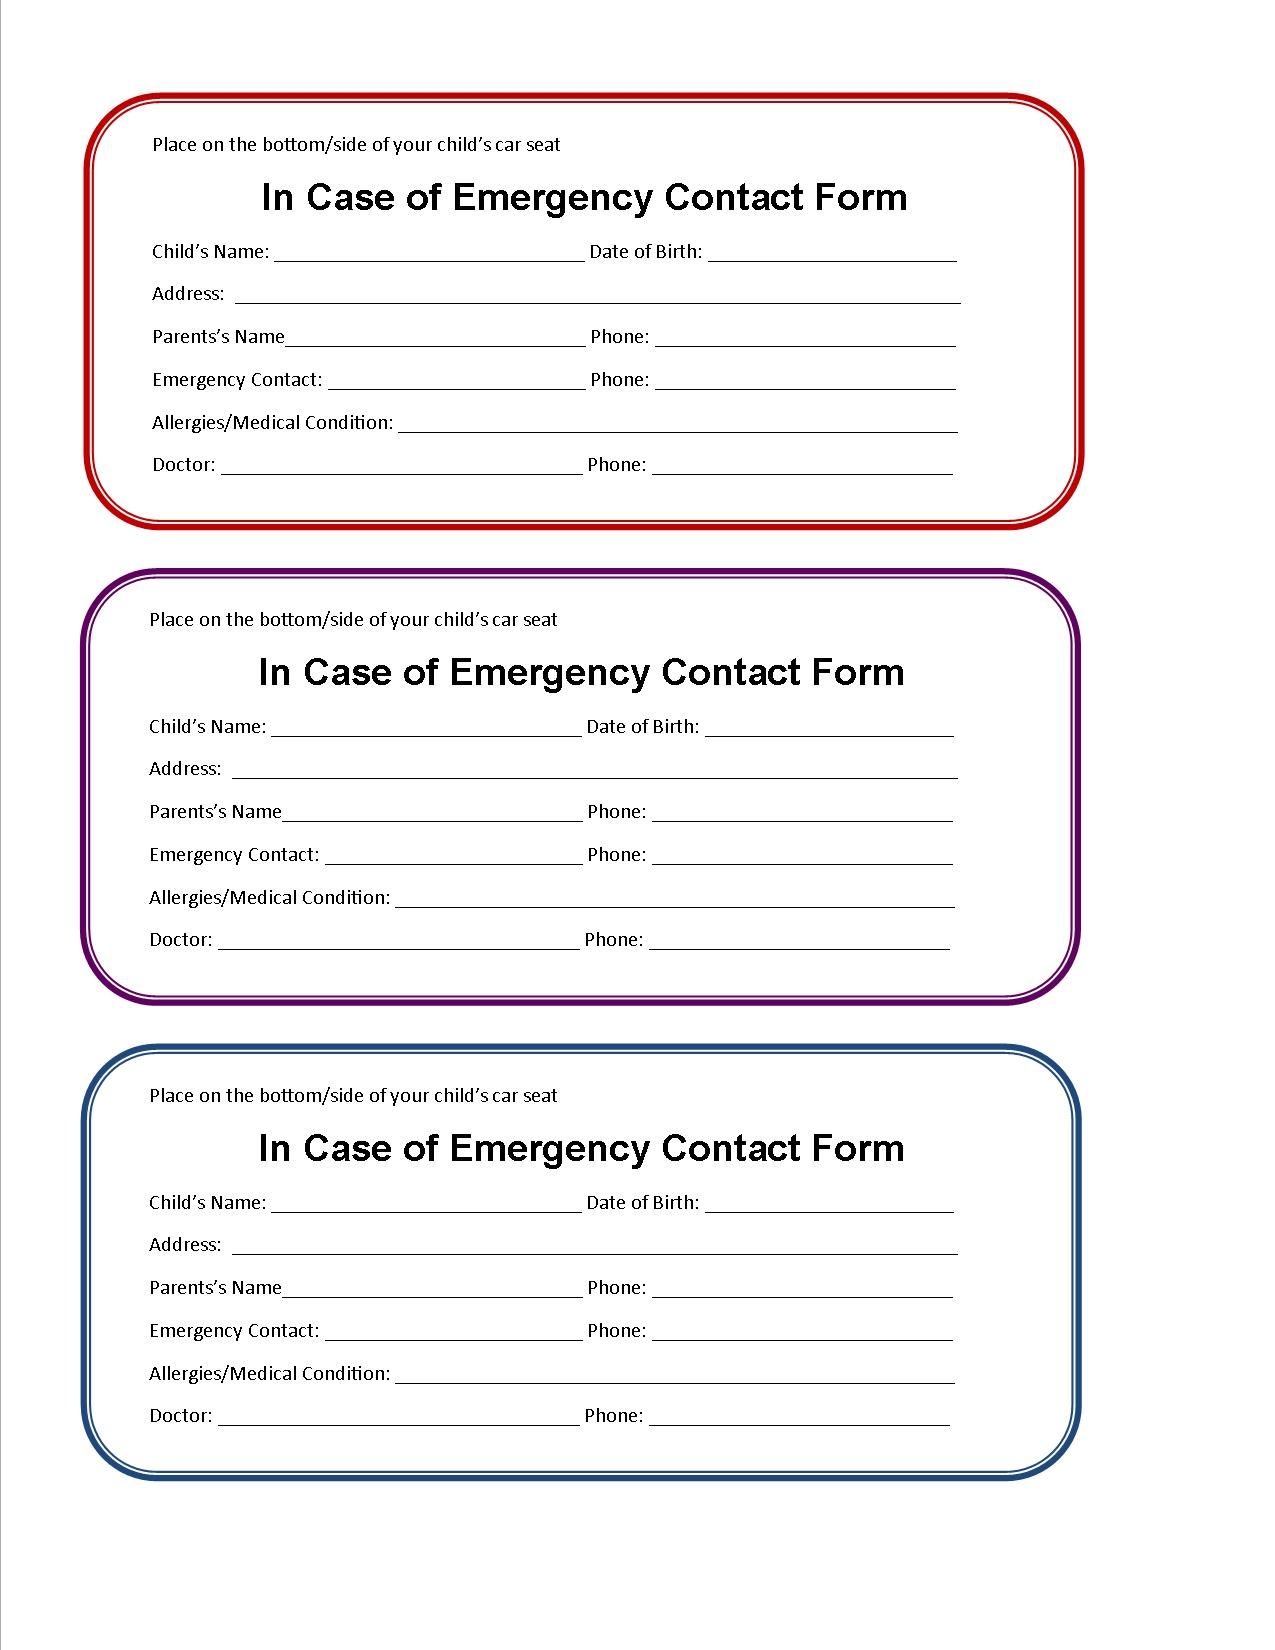 printable emergency contact form for car seat | Cub scouts 